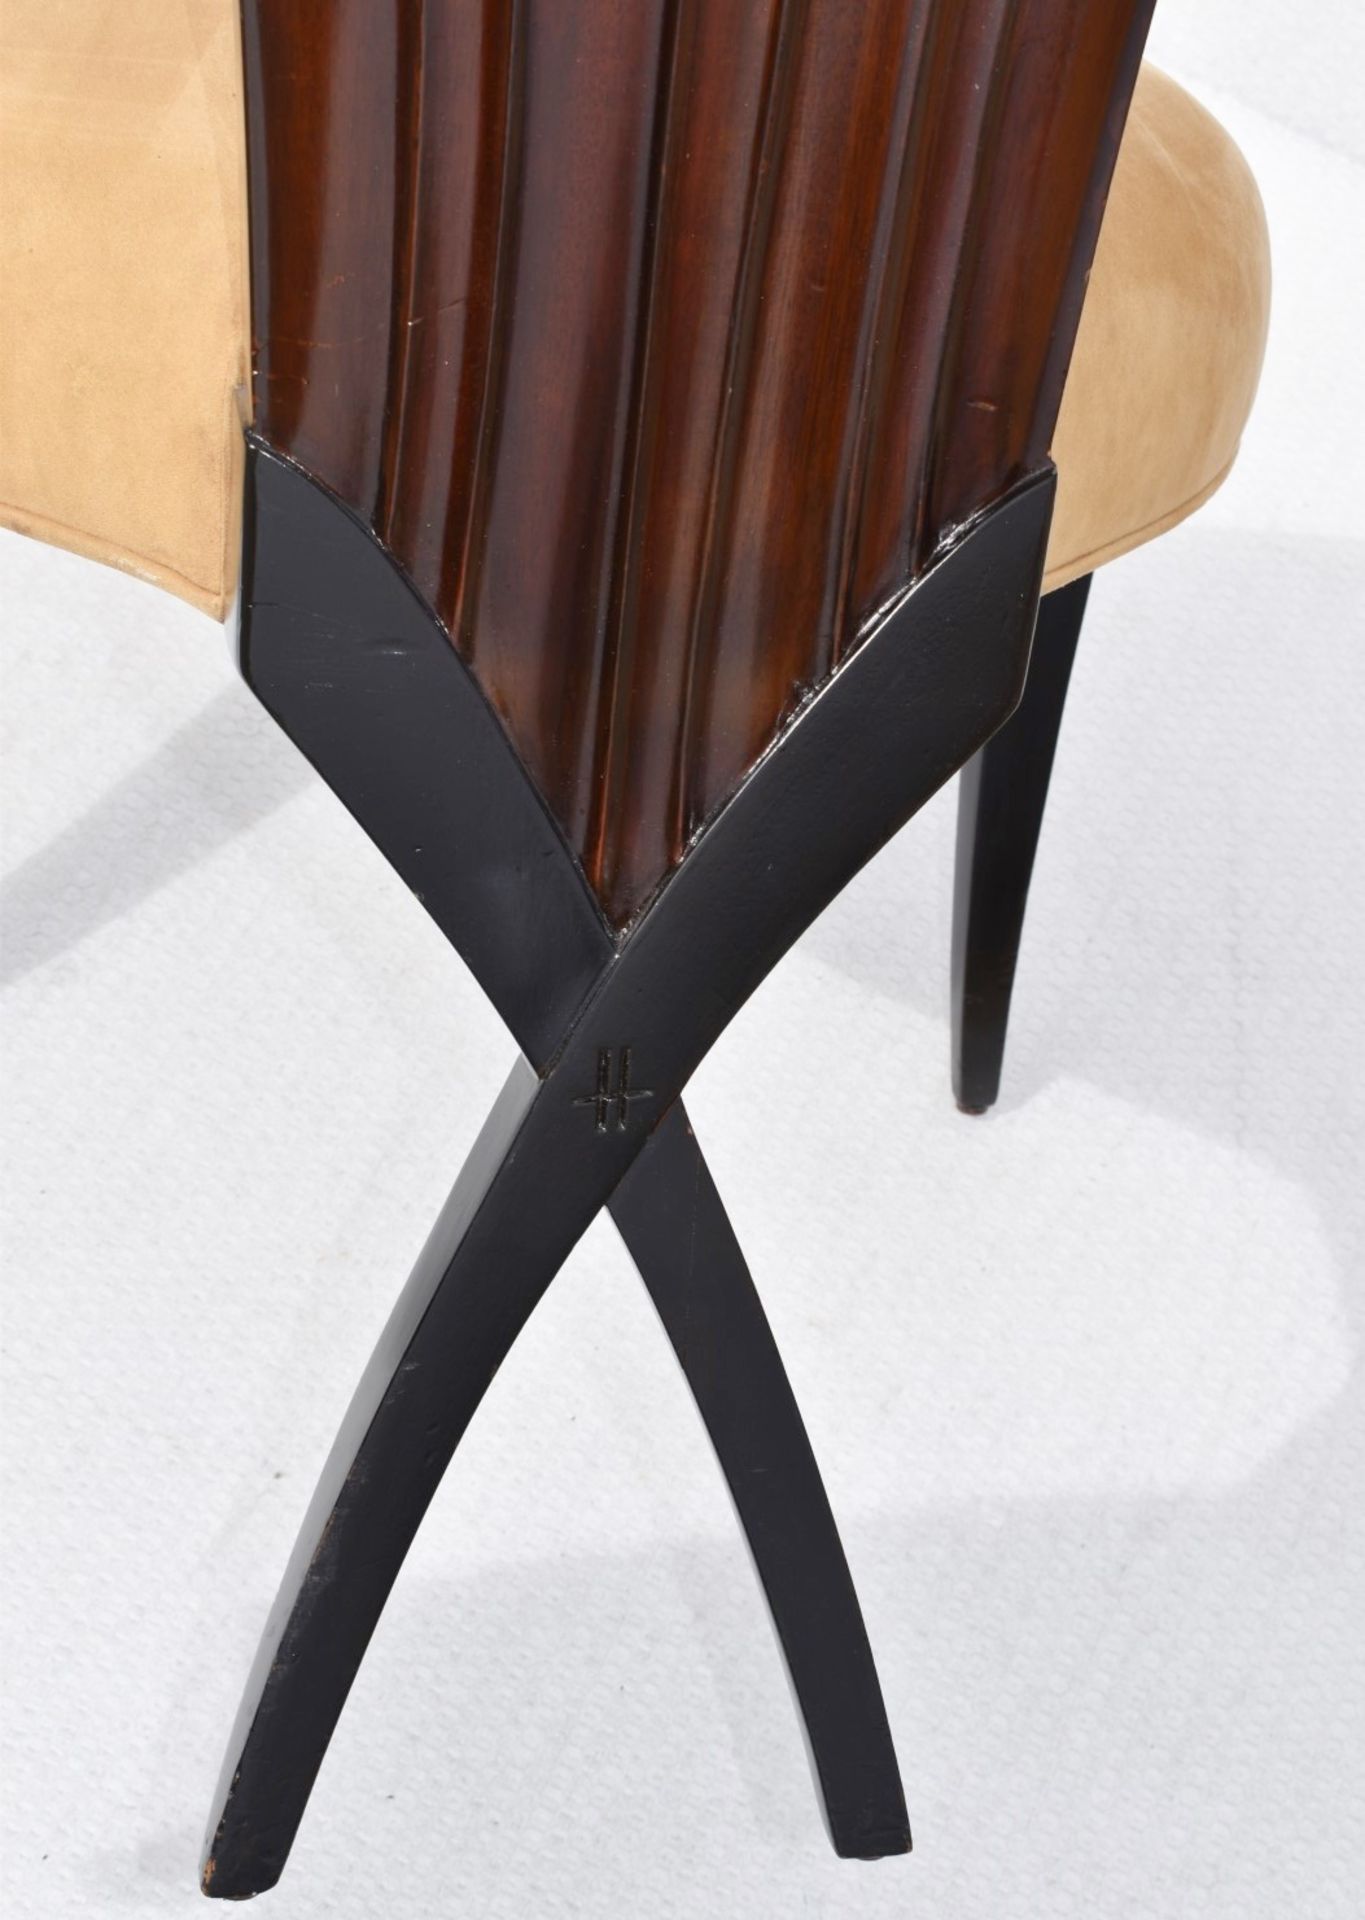 4 x CHRISTOPHER GUY 'La Croisette' Luxury Hand-carved Solid Mahogany Designer Dining Chairs - - Image 6 of 11